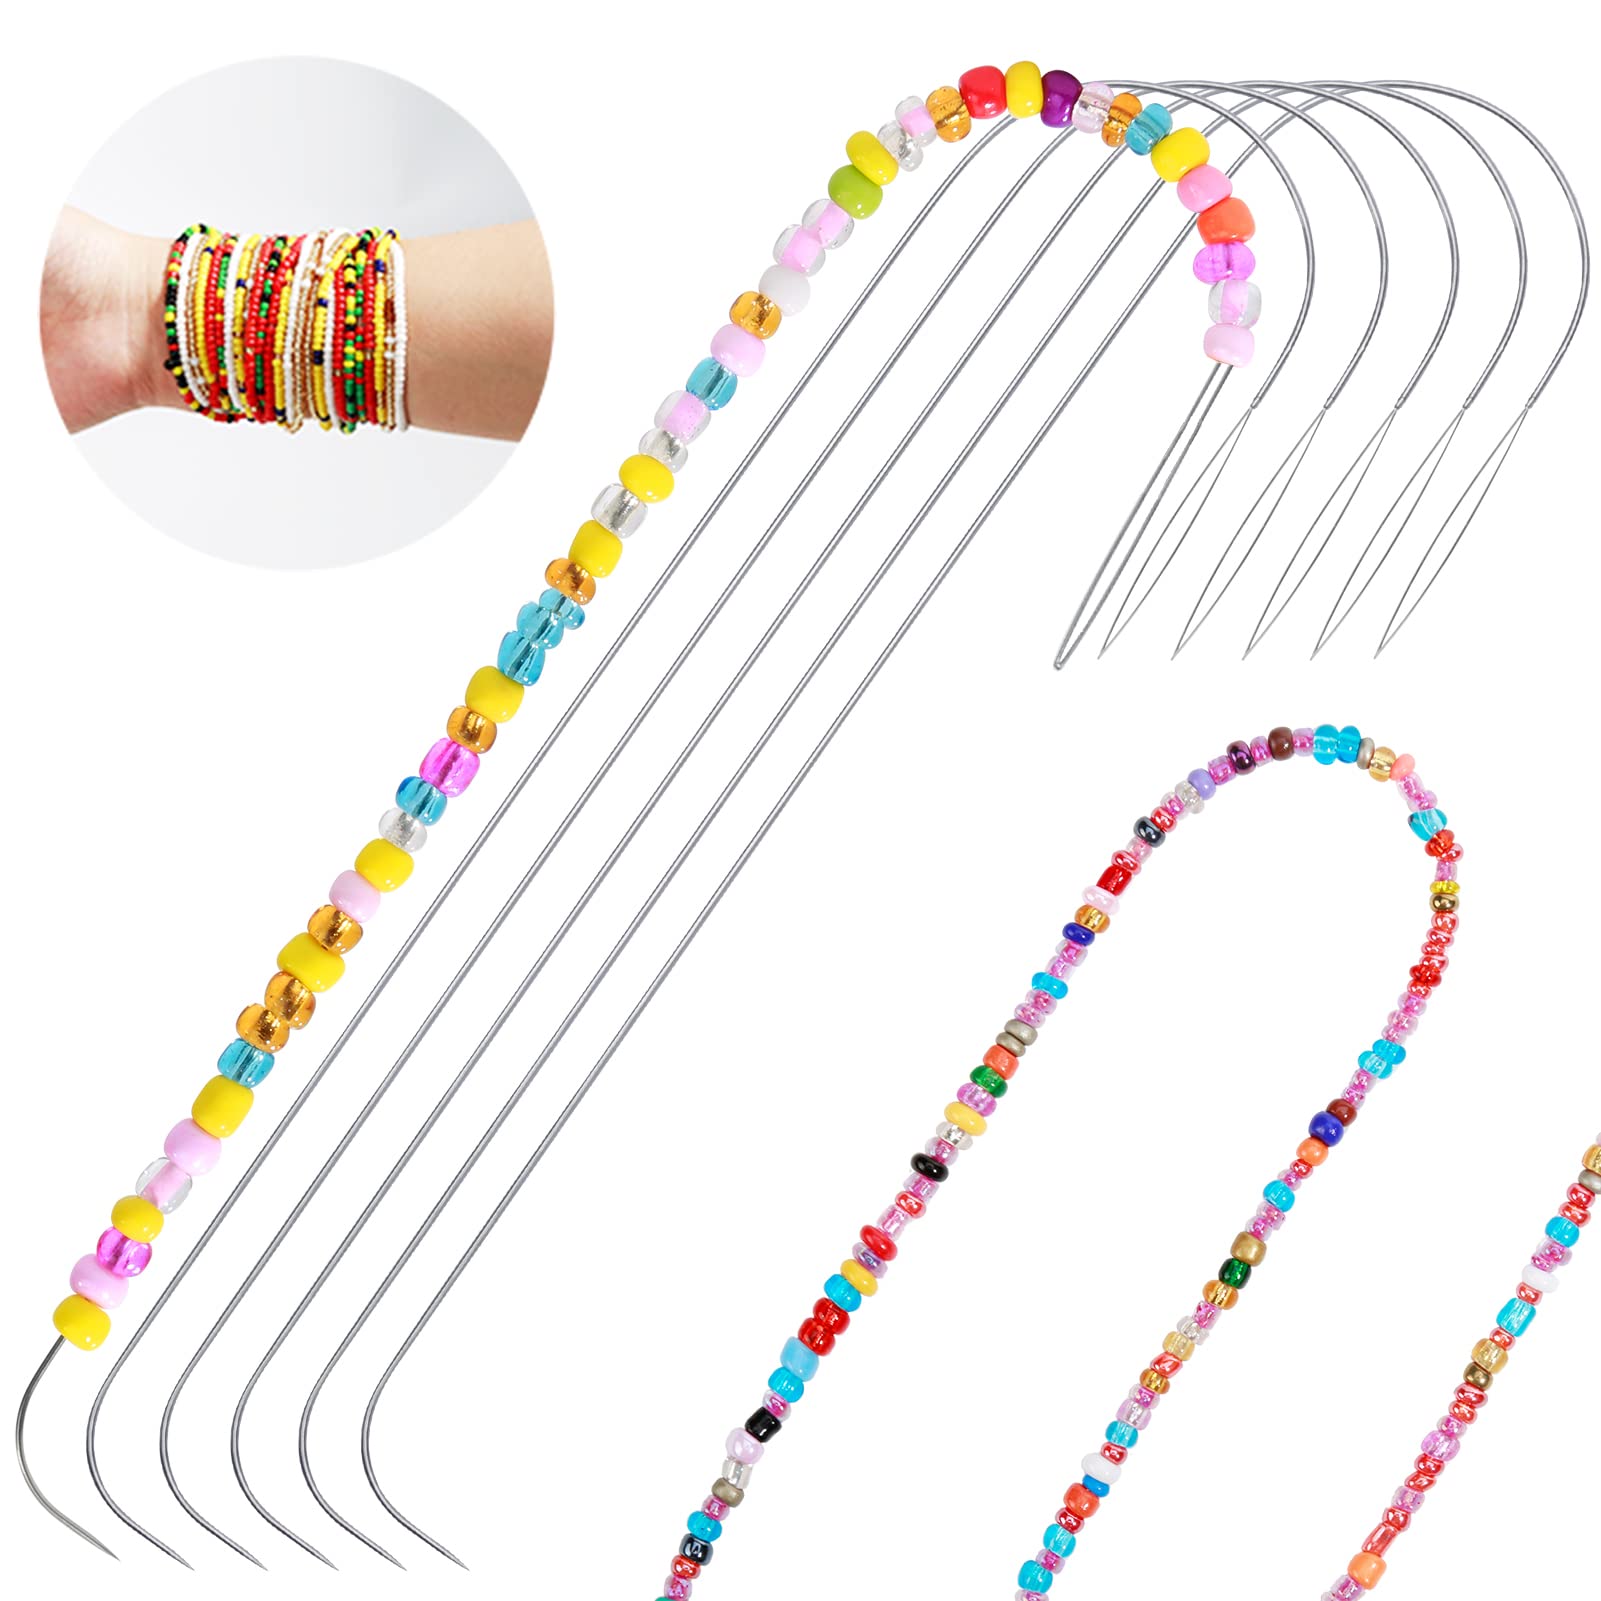 3/6PCS Curved Beading Needles Stainless Bead Spinner Needles Thin Bead  Needles for Jewelry Making Sewing Spin Bead DIY Craft